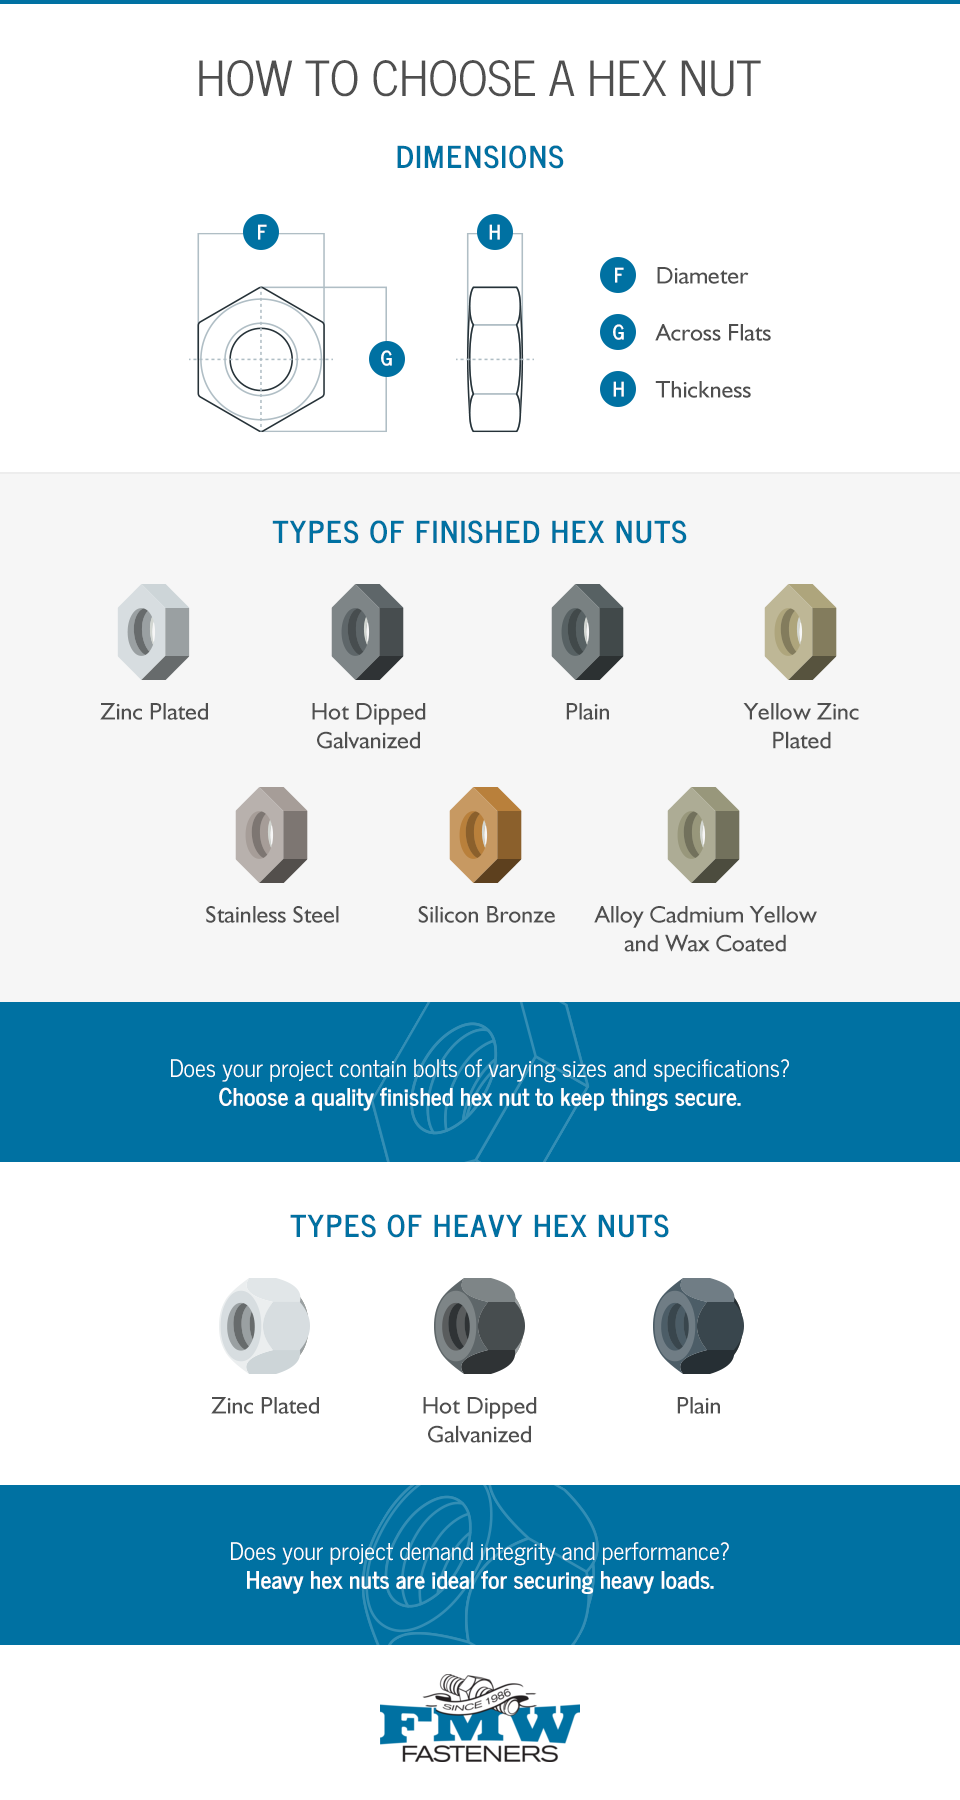 how to choose a hex nut - hex nut dimensions info-graphic, types of heavy hex nuts